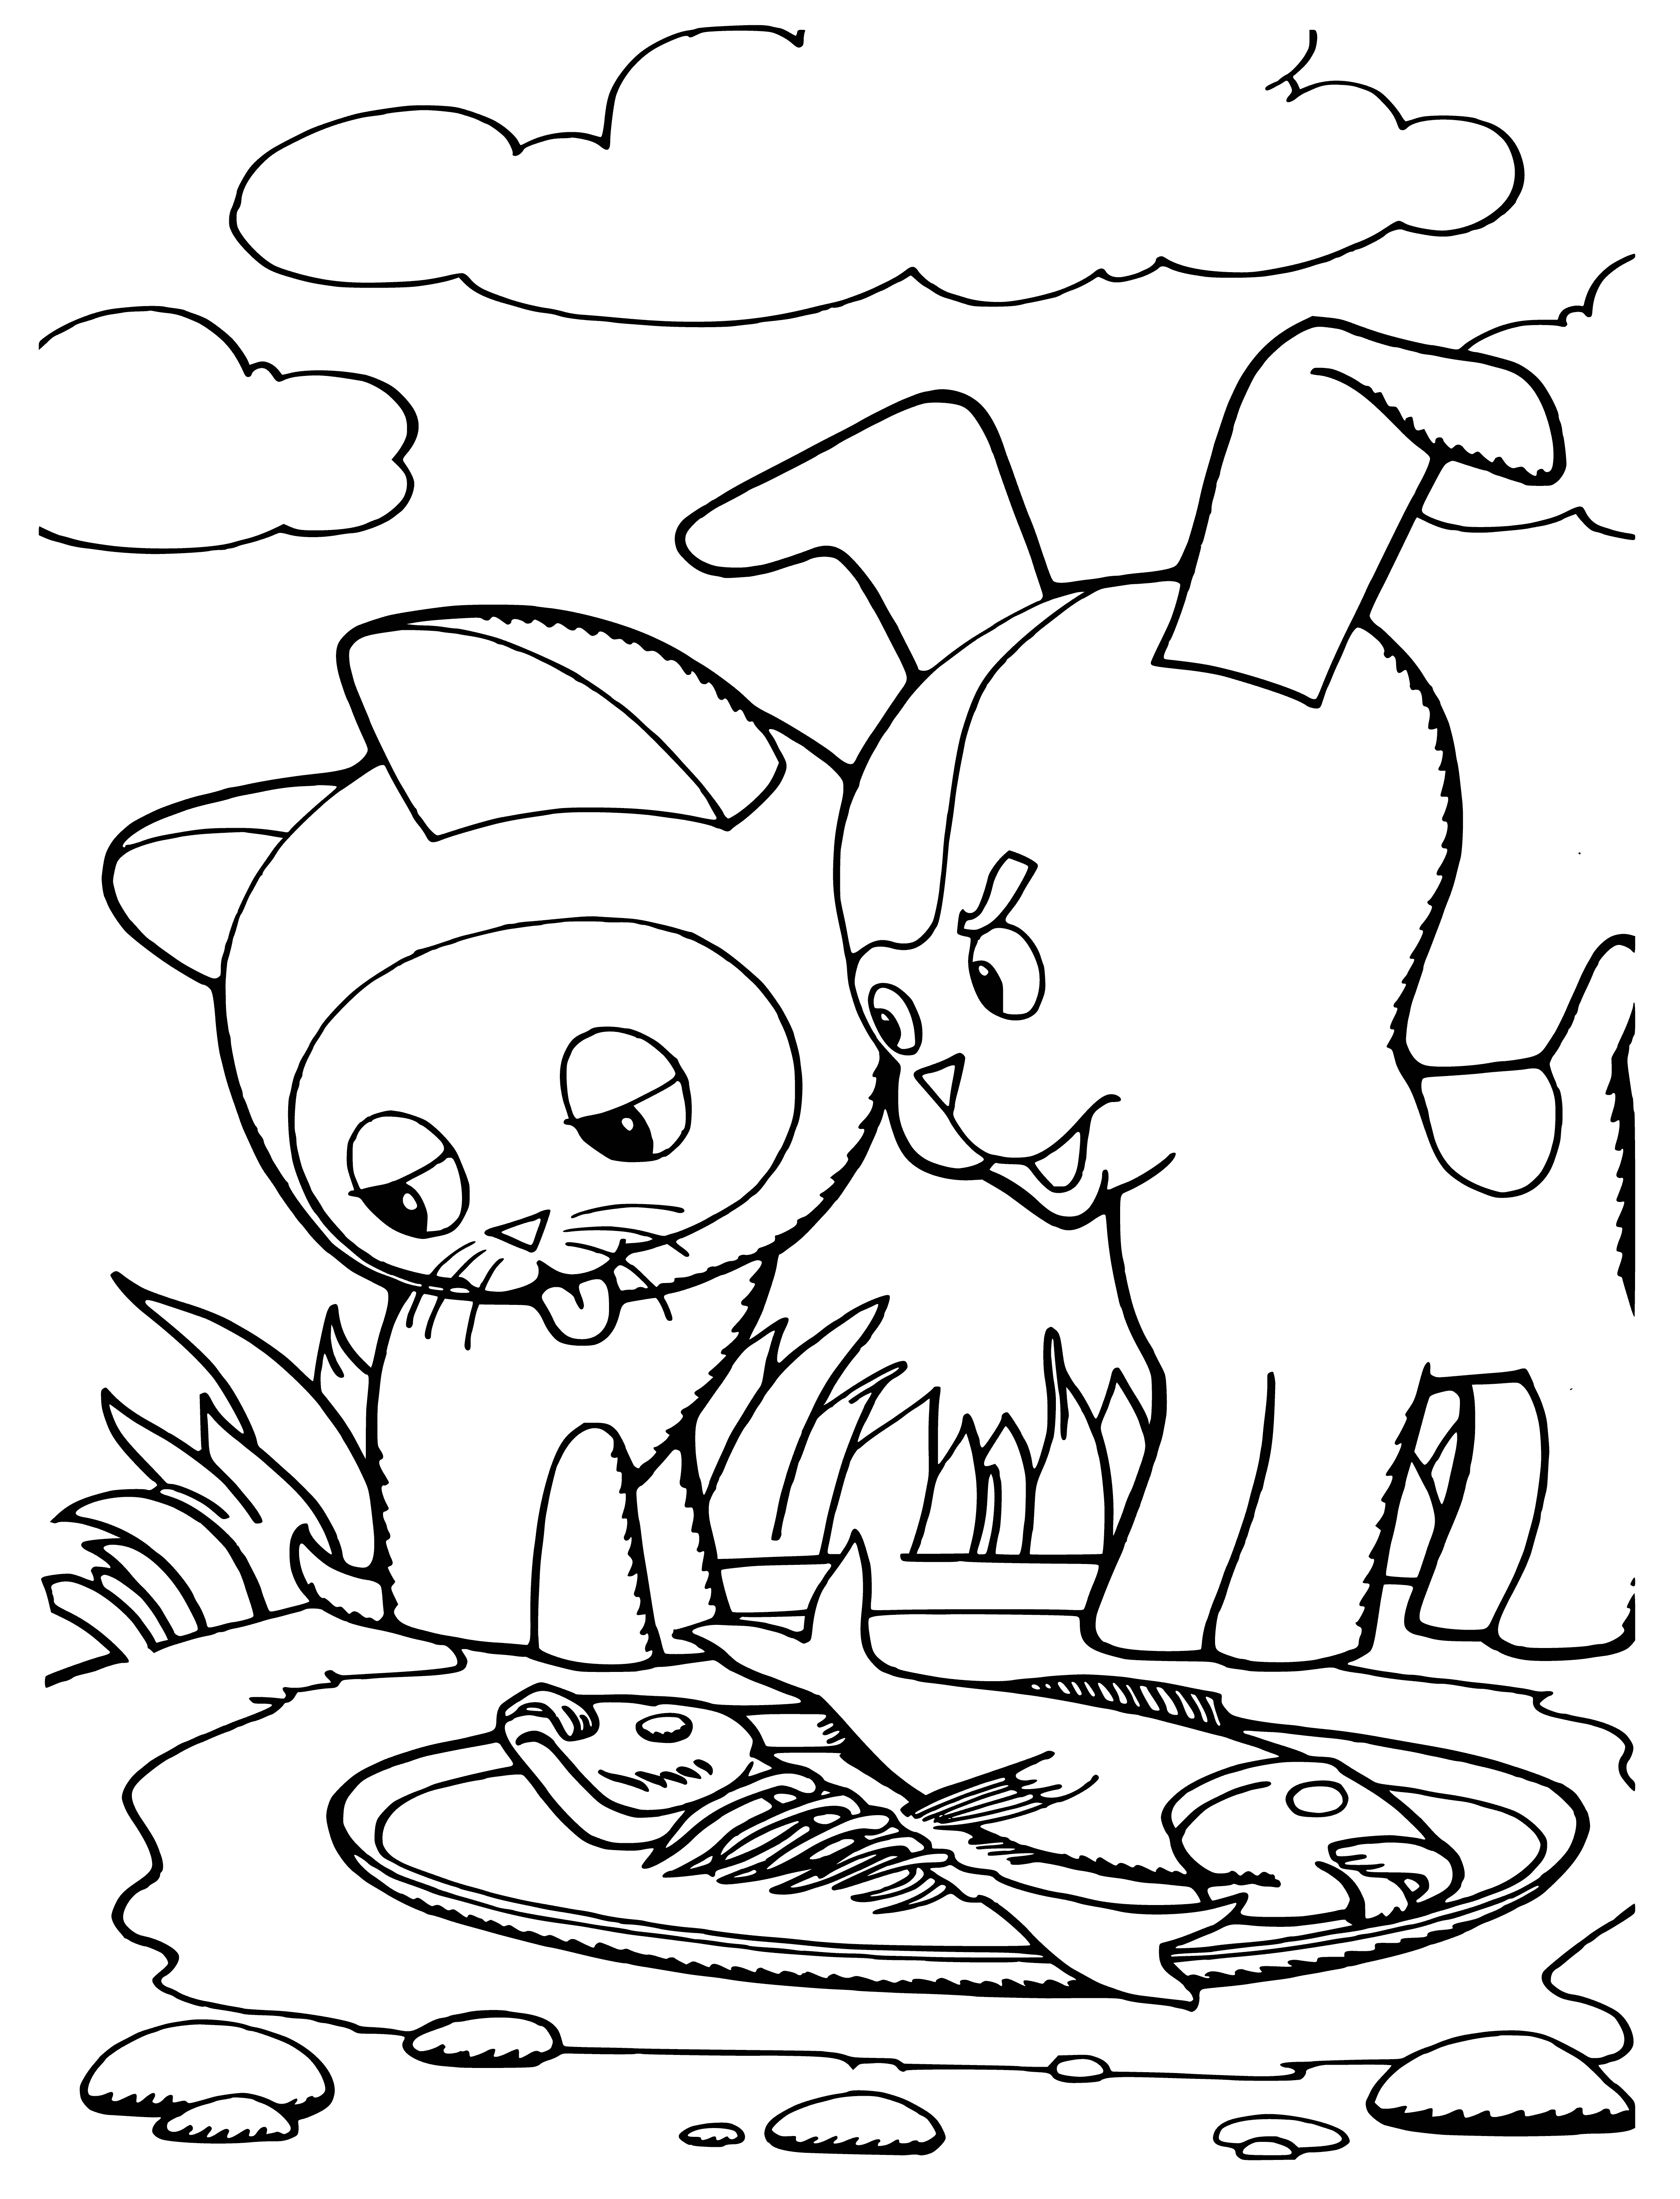 coloring page: Kitten opens wide ready to feast on breakfast of toast and eggs, background is white.